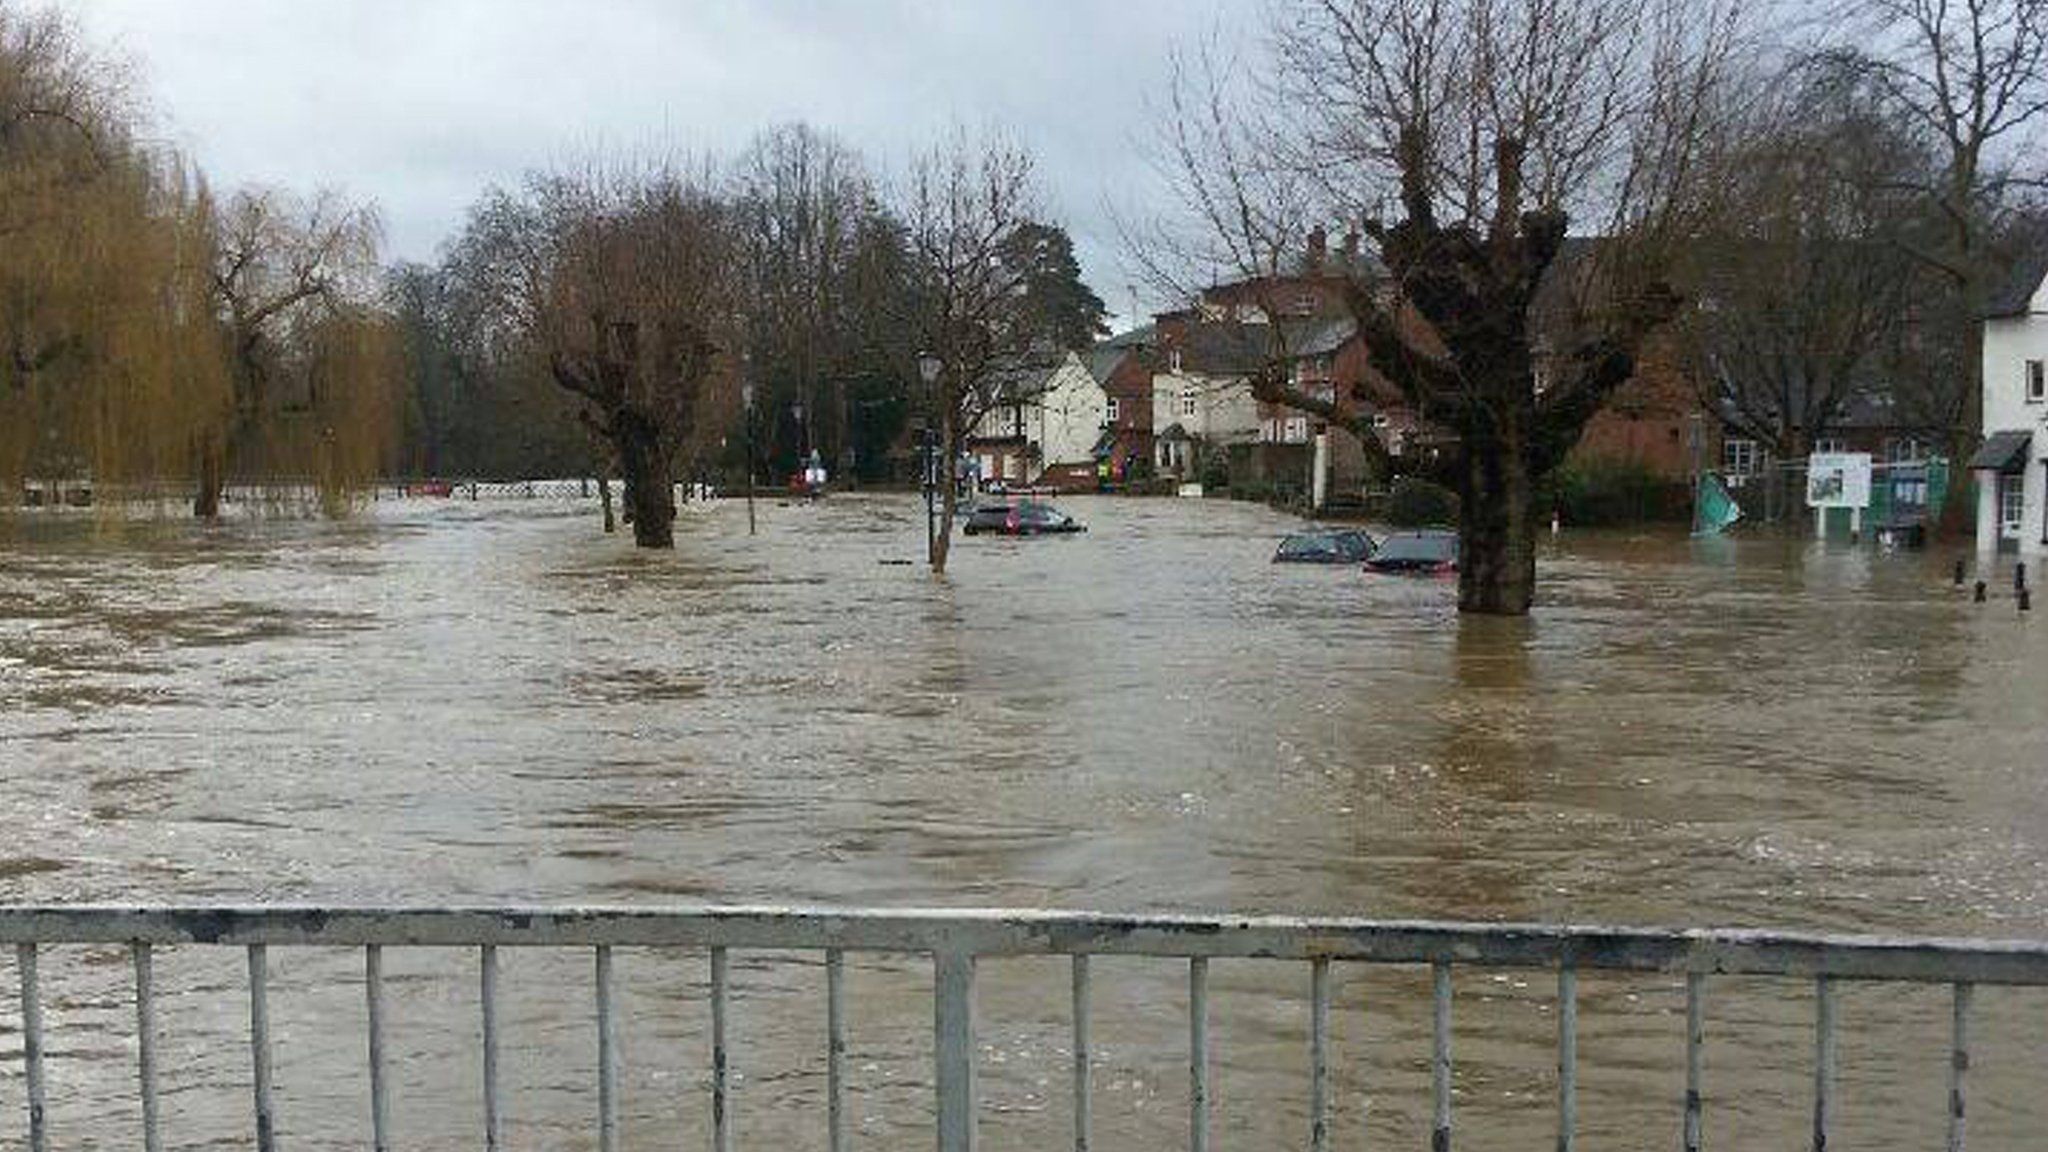 River Wey flood in Guildford